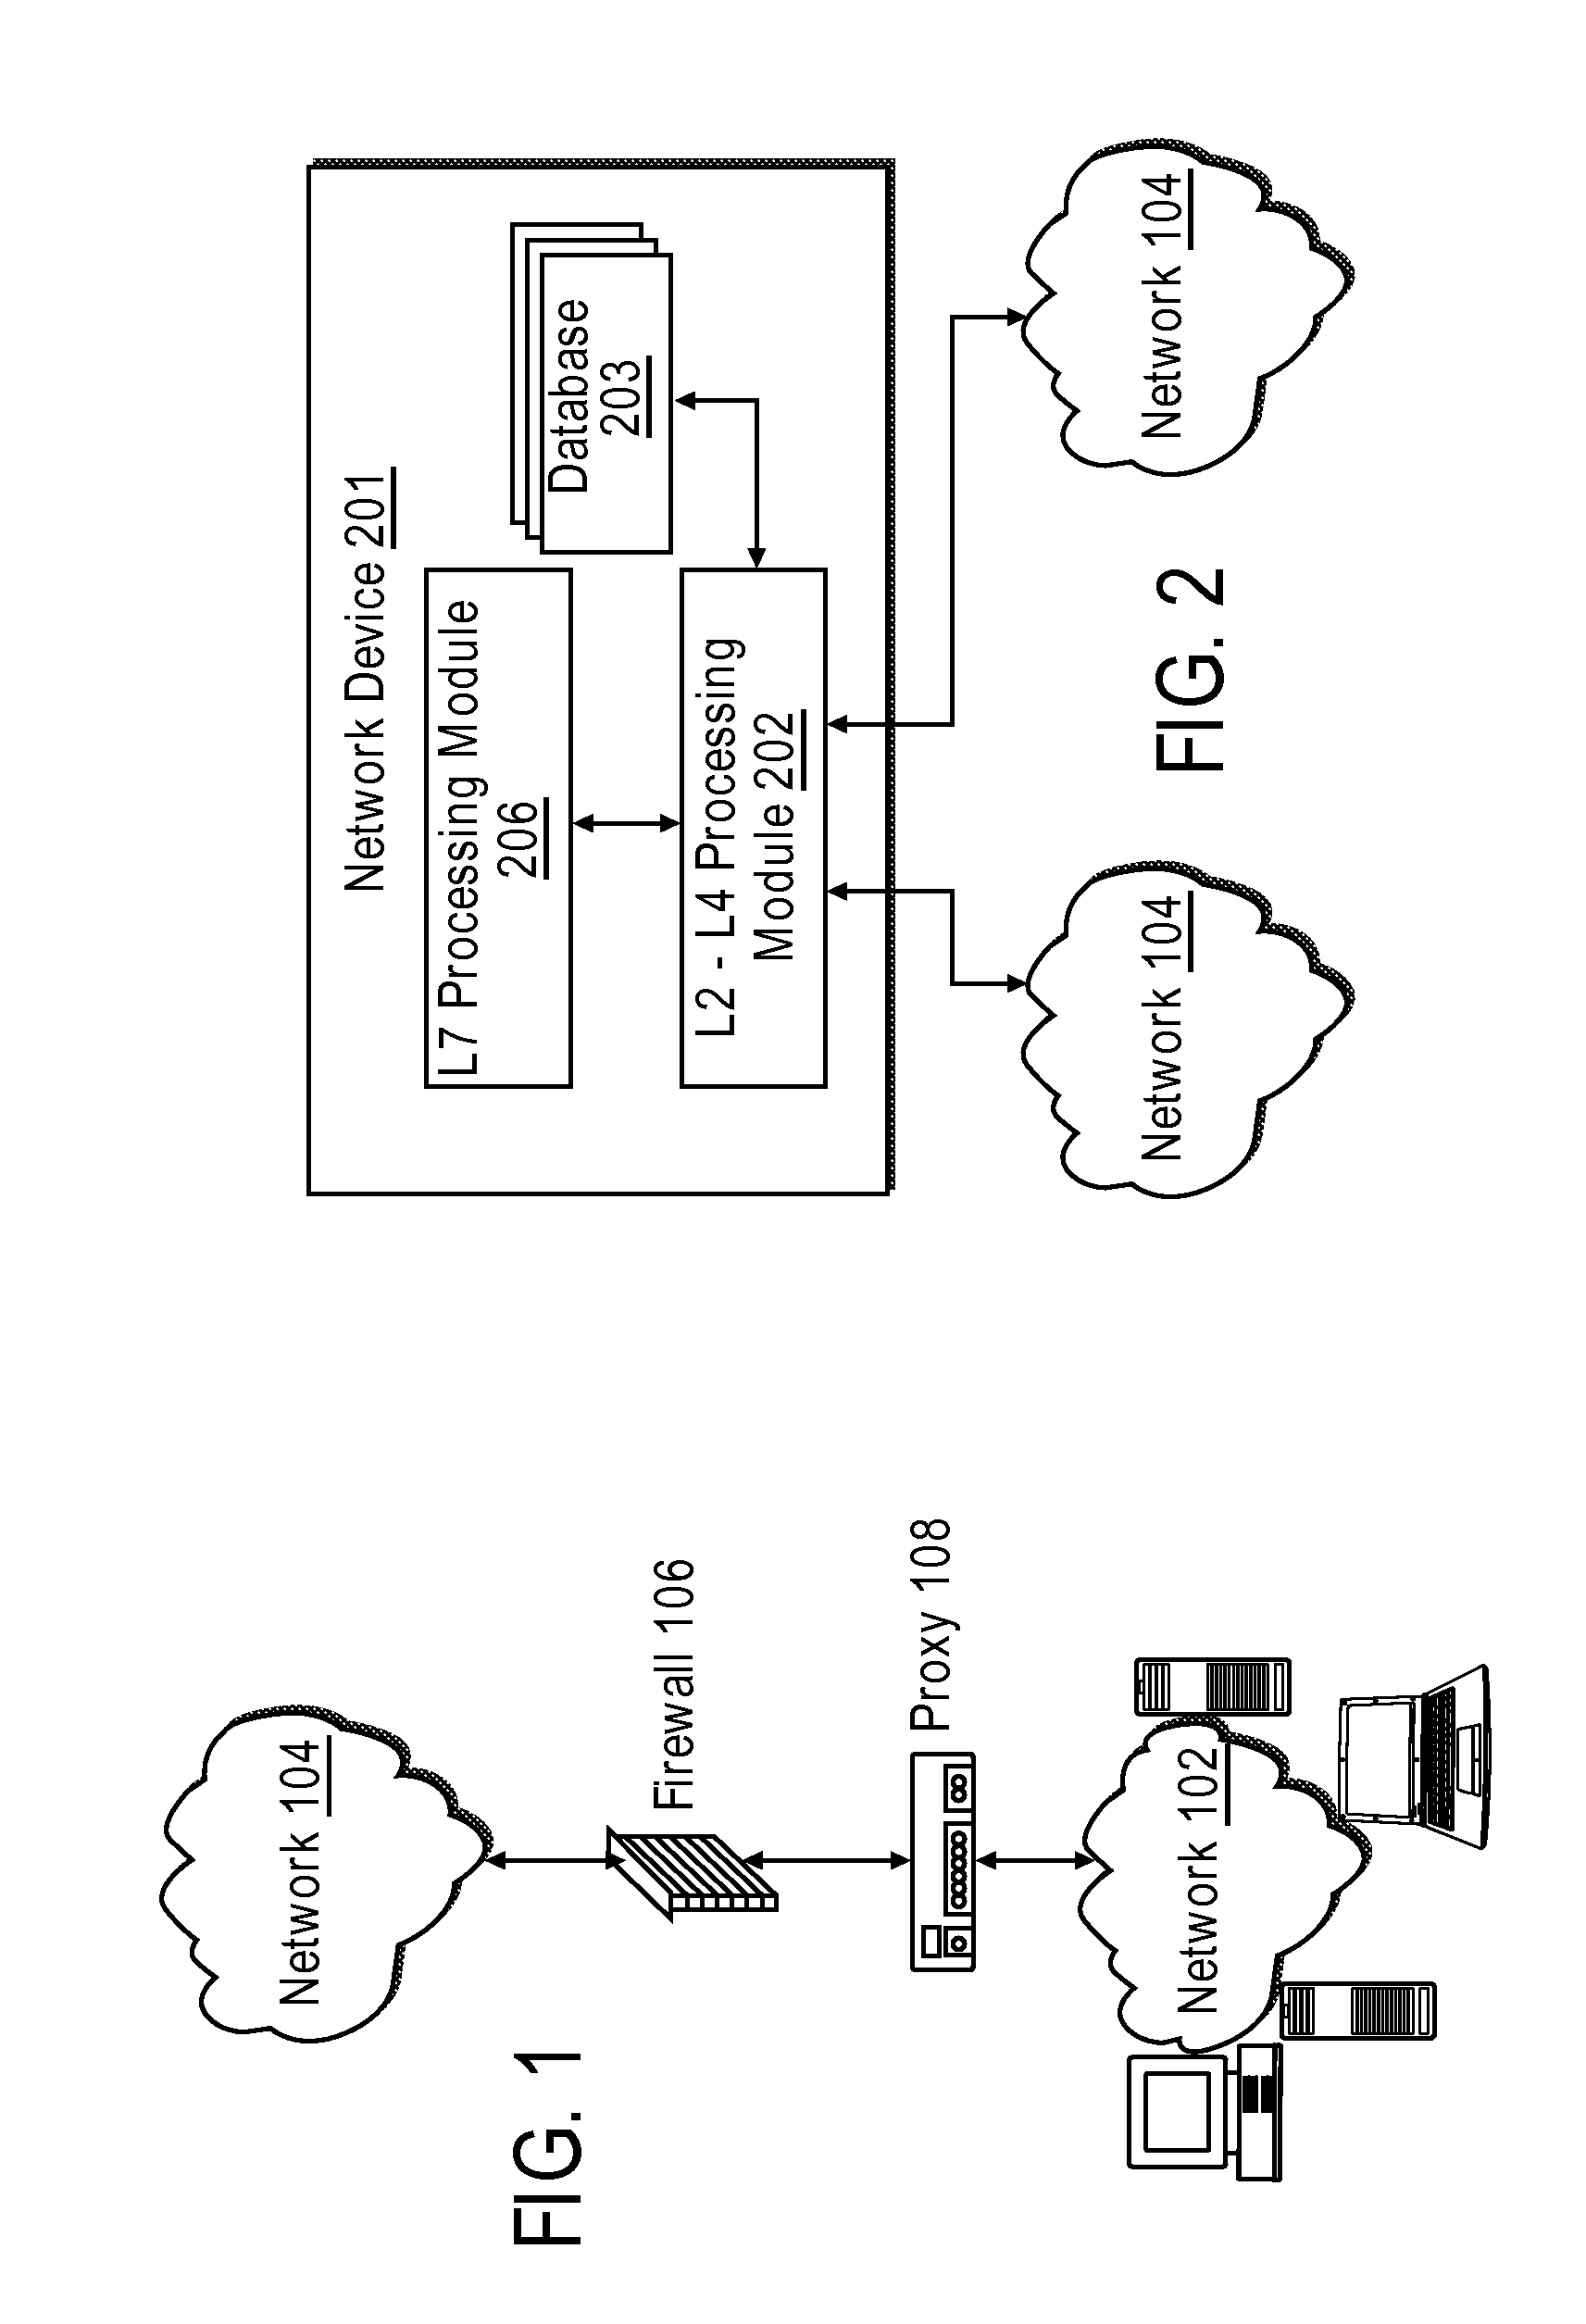 System and method of traffic inspection and classification for purposes of implementing session nd content control